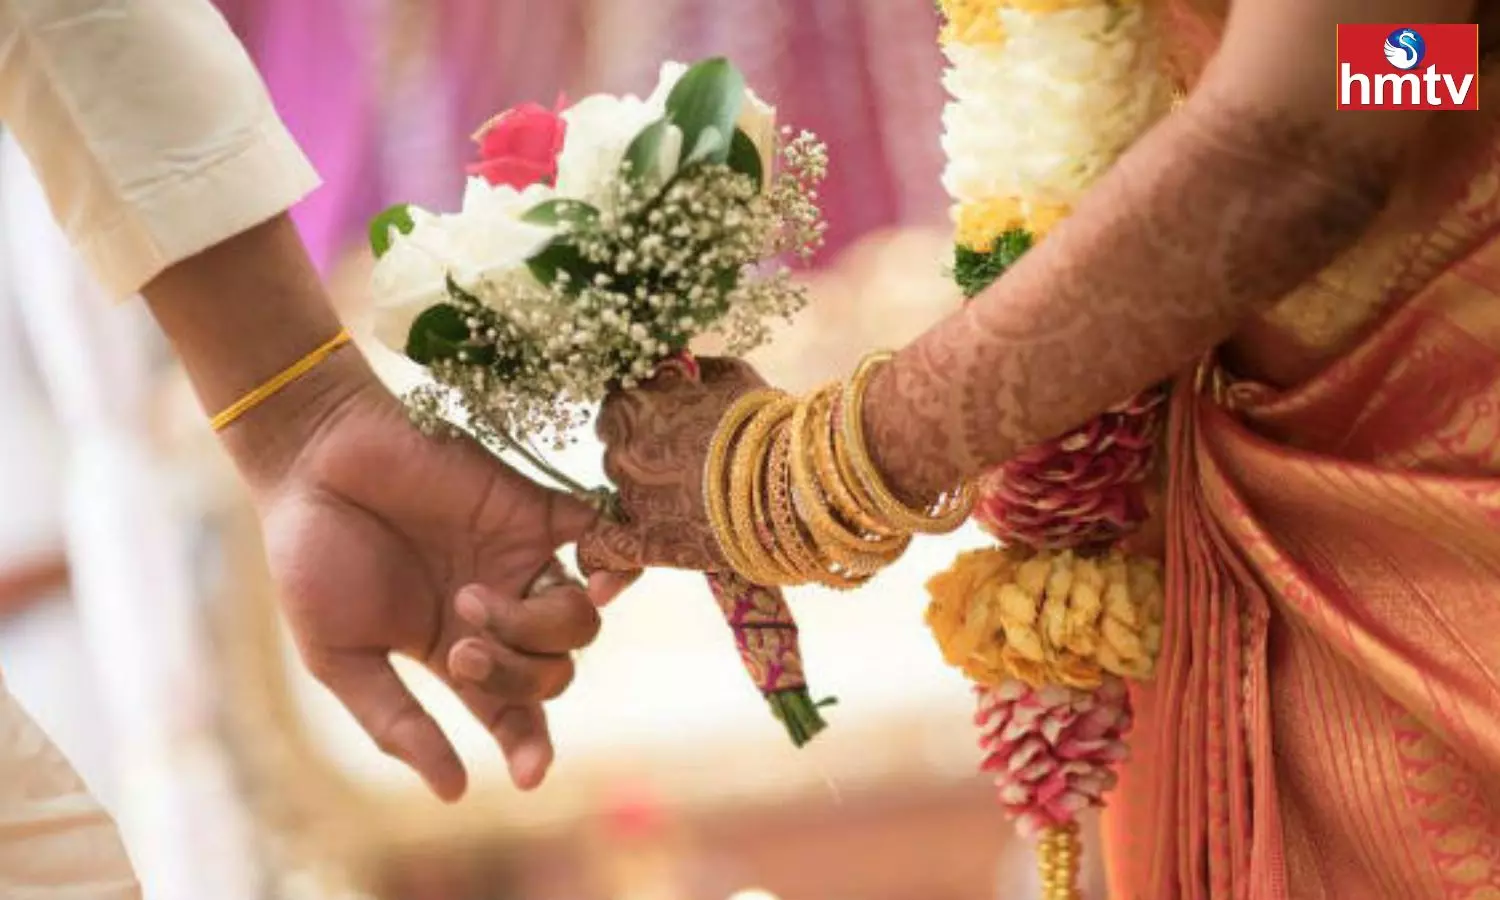 Marital Relations Are Set And Going Bad Again Do These Remedies According To Astrology